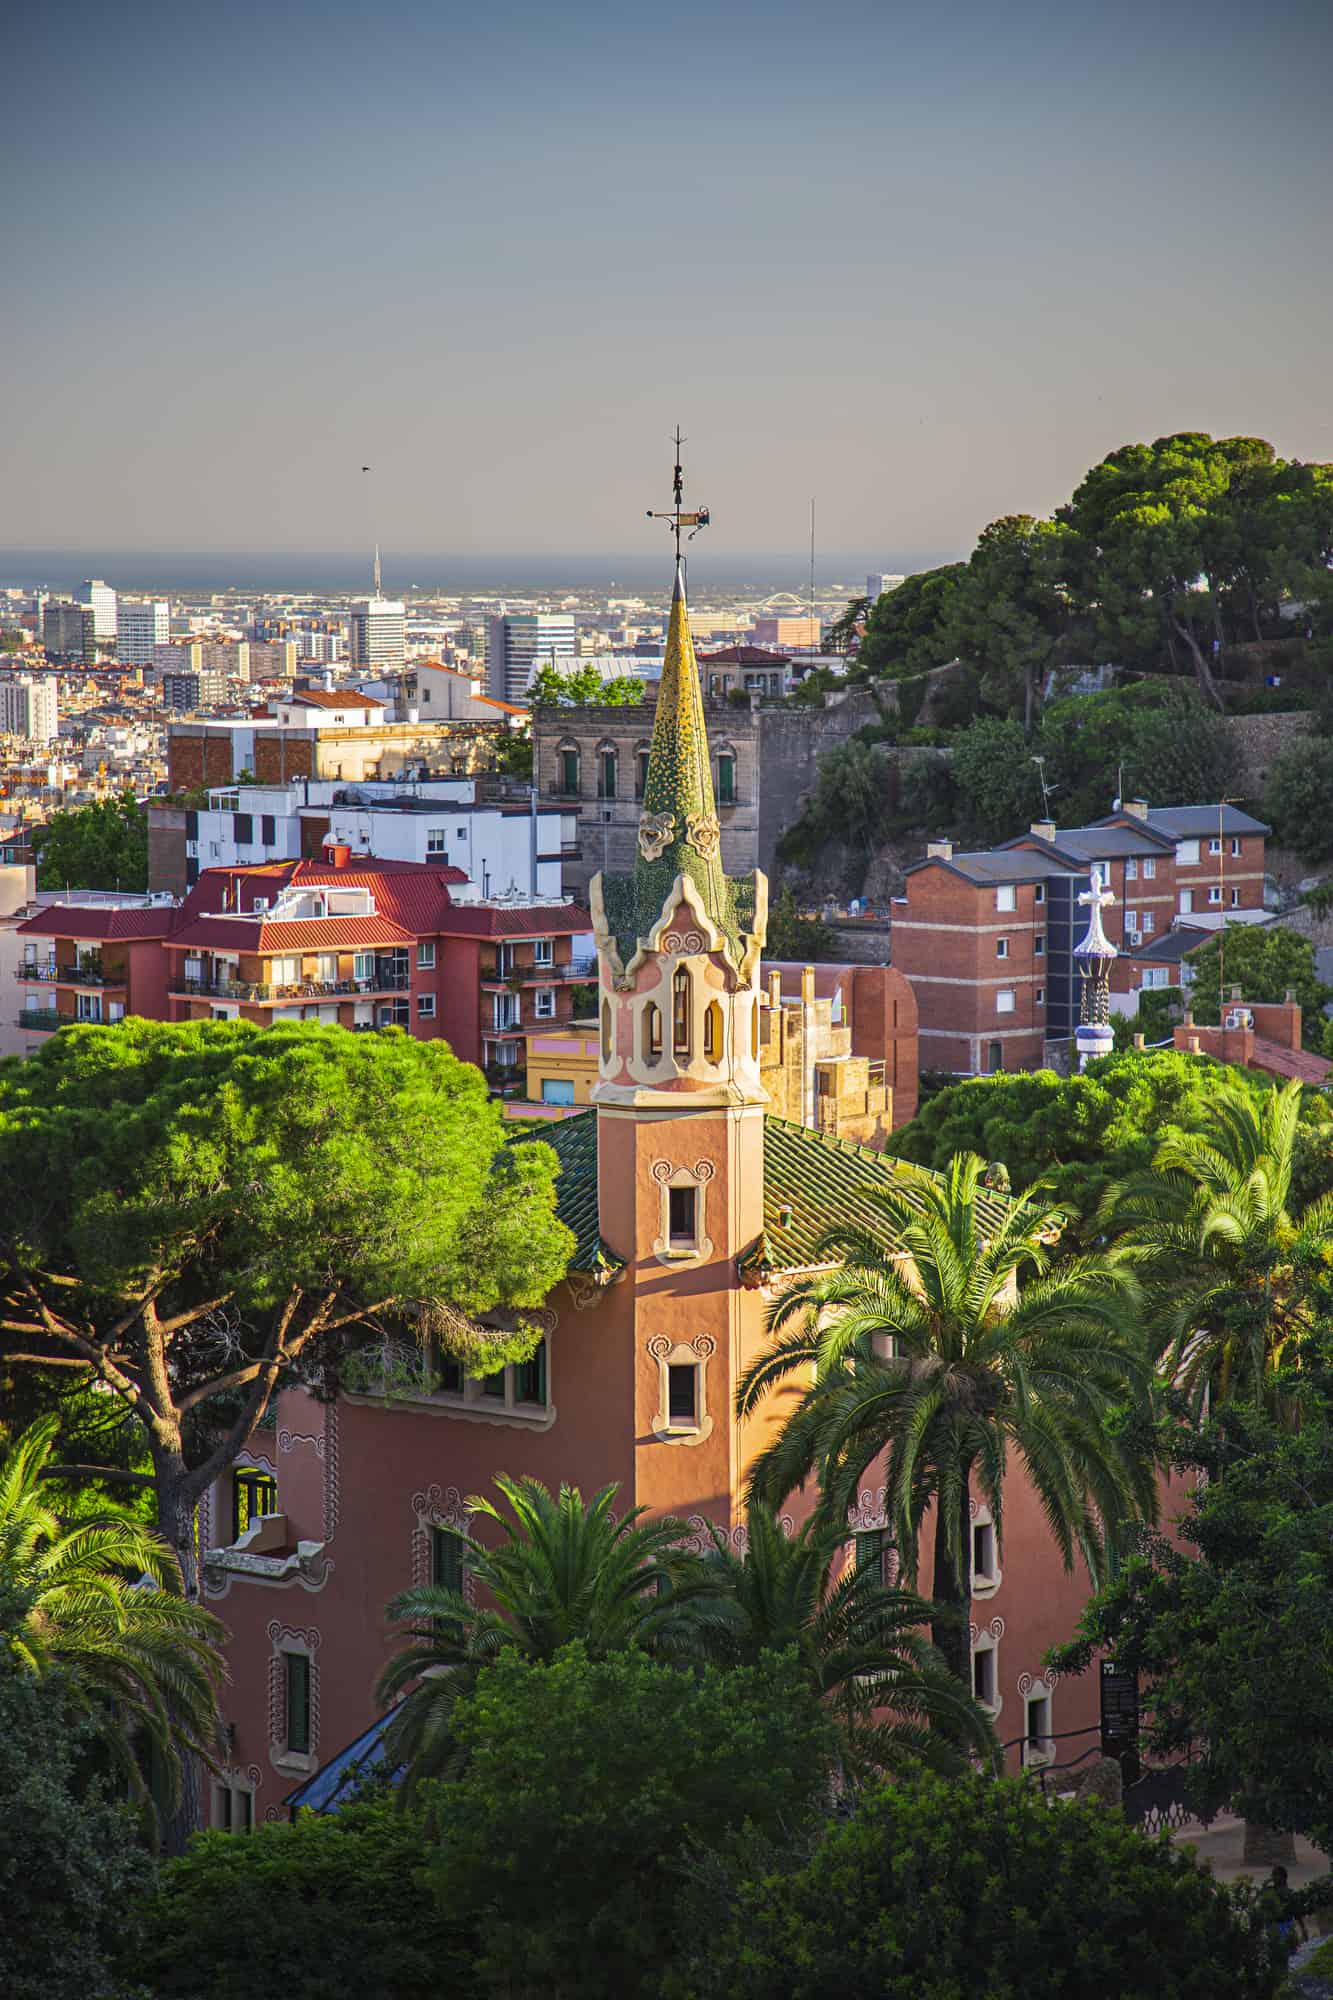 Gaudi house church at sunset, with Barcelona as a background